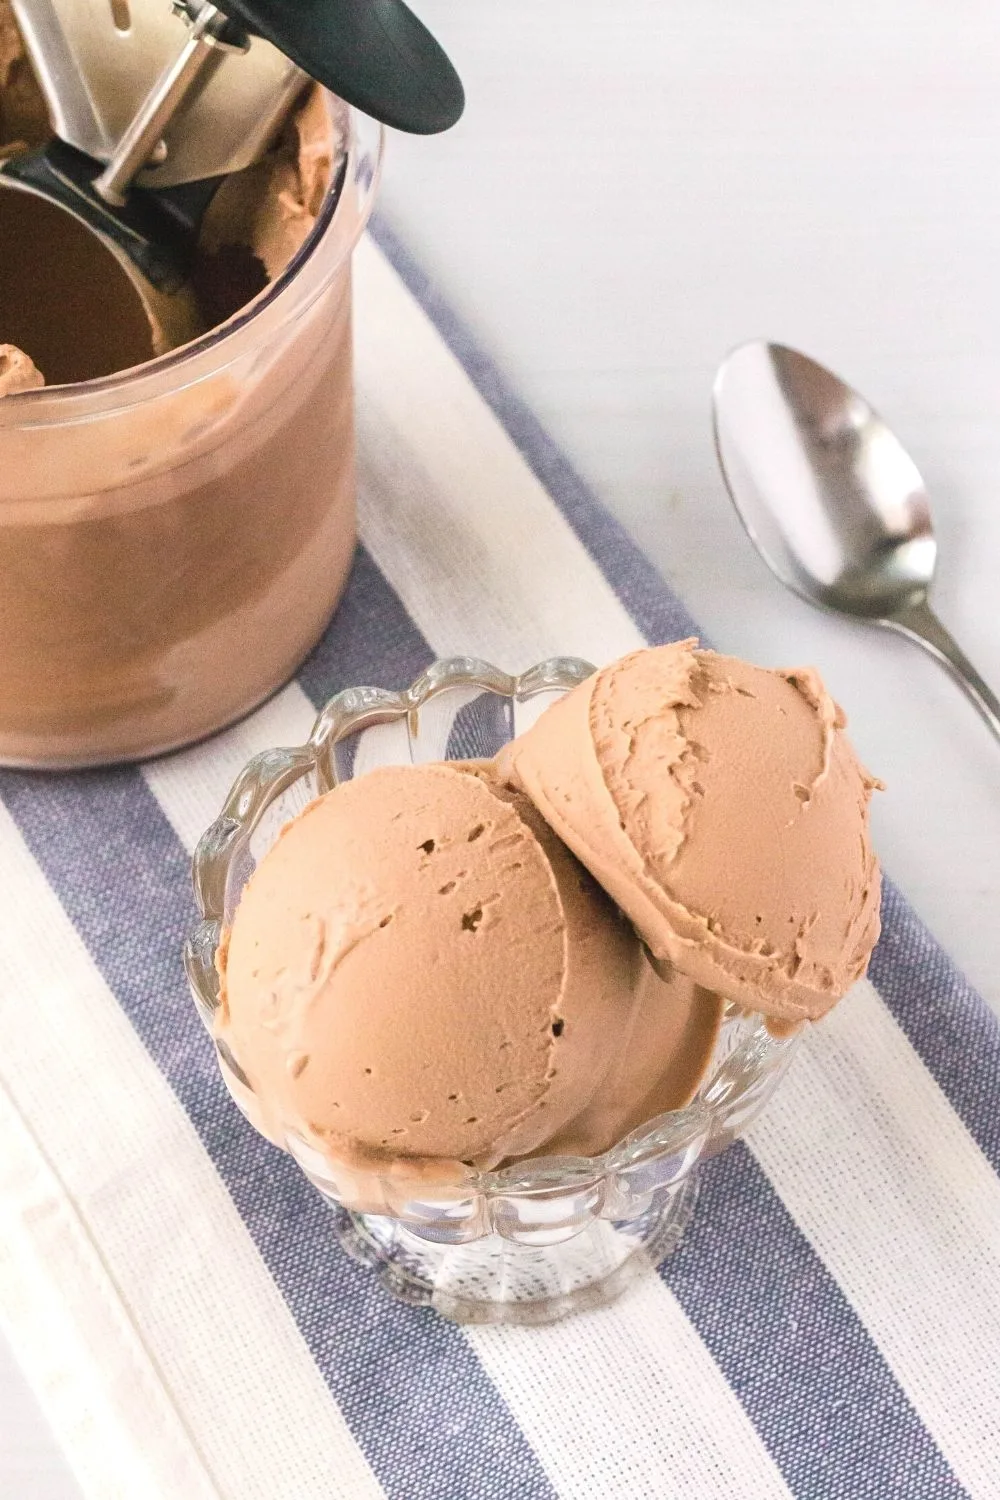 glass dish serving scoops of Ninja Creami dairy free chocolate ice cream. A ninja creami pint of ice cream and a spoon are in the background.